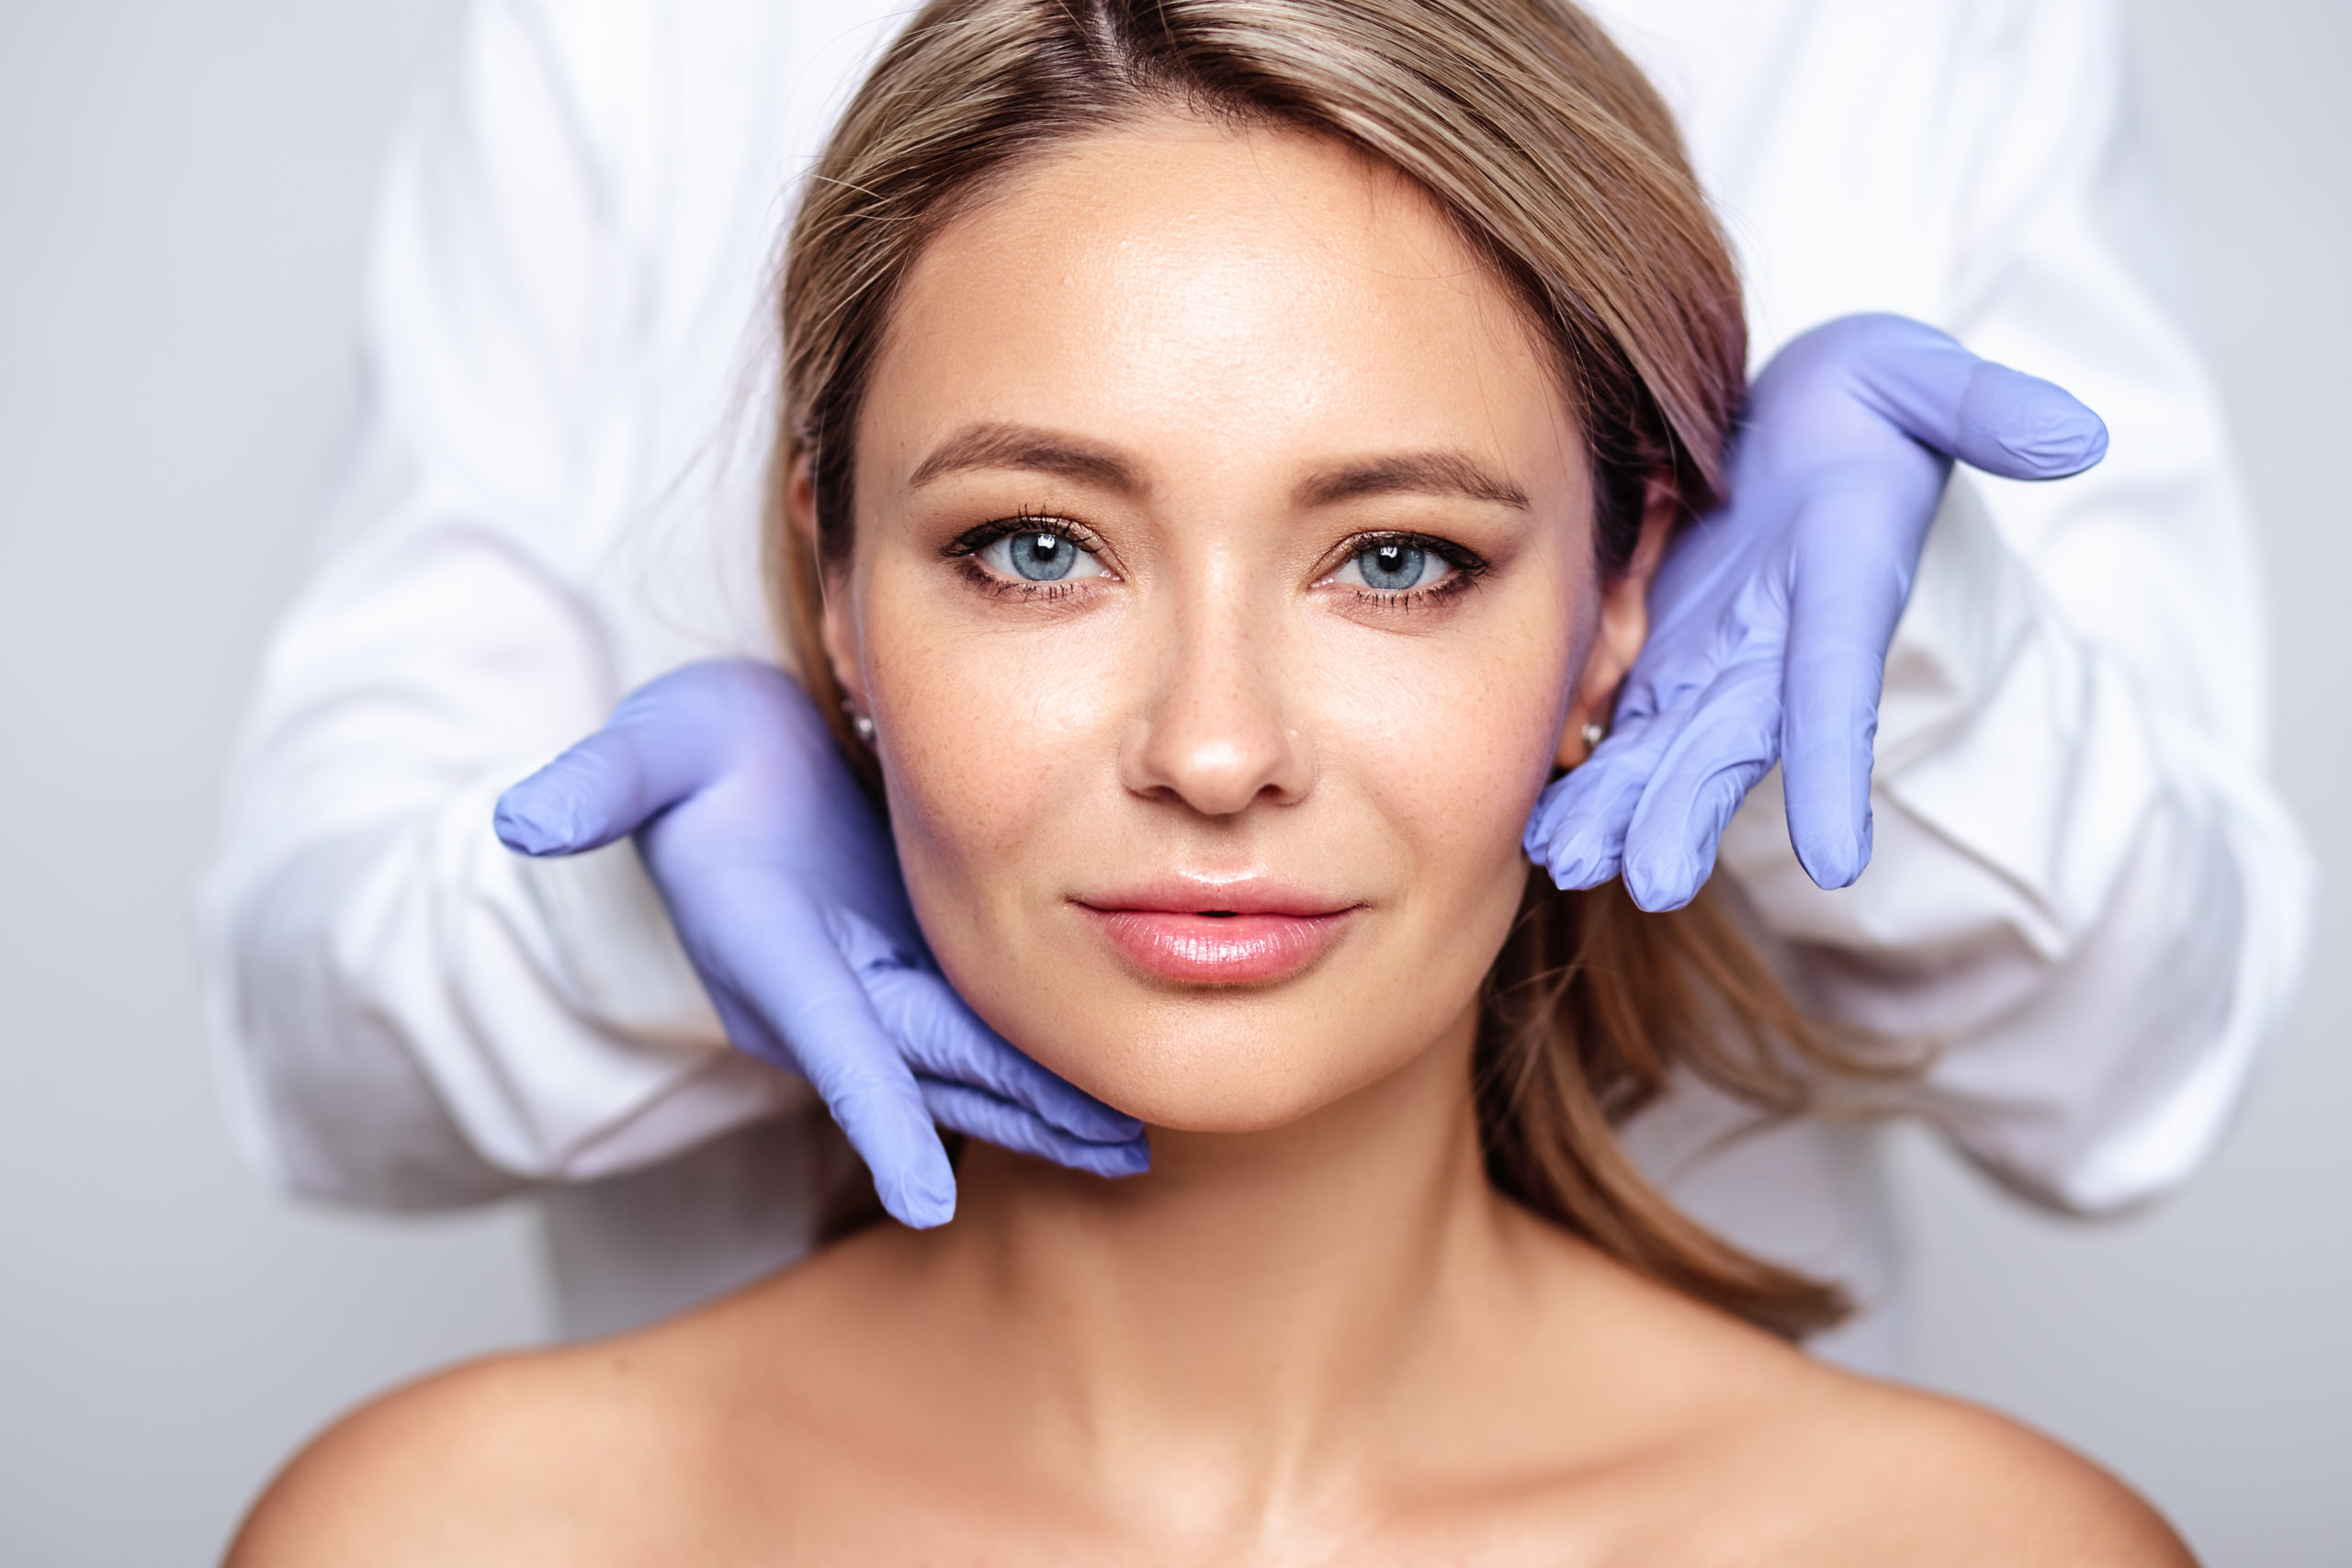 Top 7 Myths & Facts about Botox: An Injectable option to get a Youthful & Rejuvenated Appearance